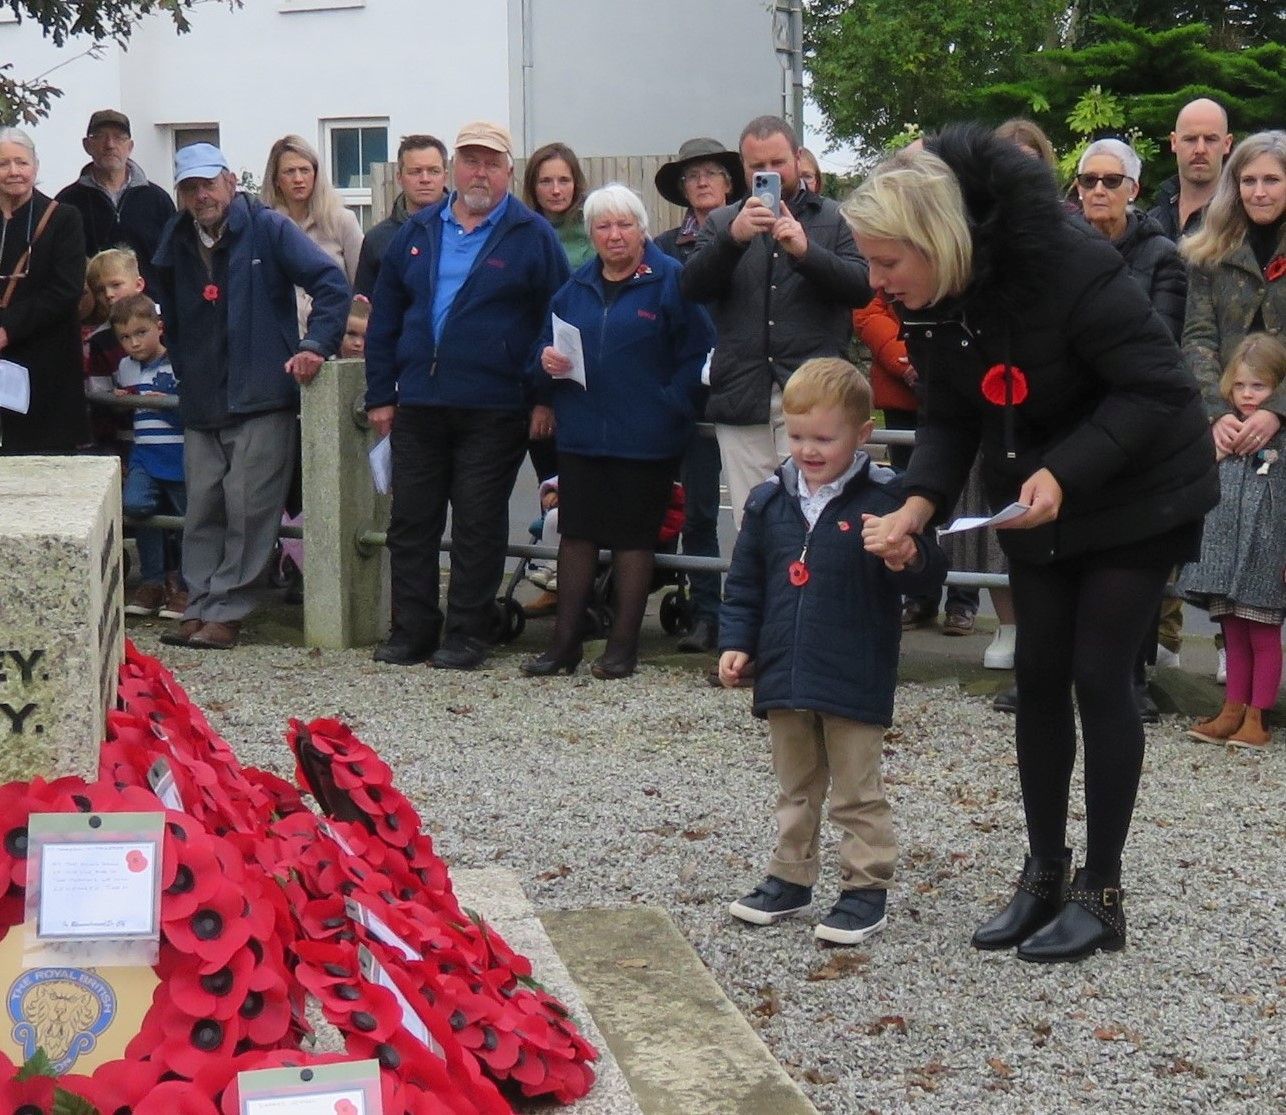 Charlie lays the wreath for Garras Owlets at The Lizard Picture: Wendy Bailey